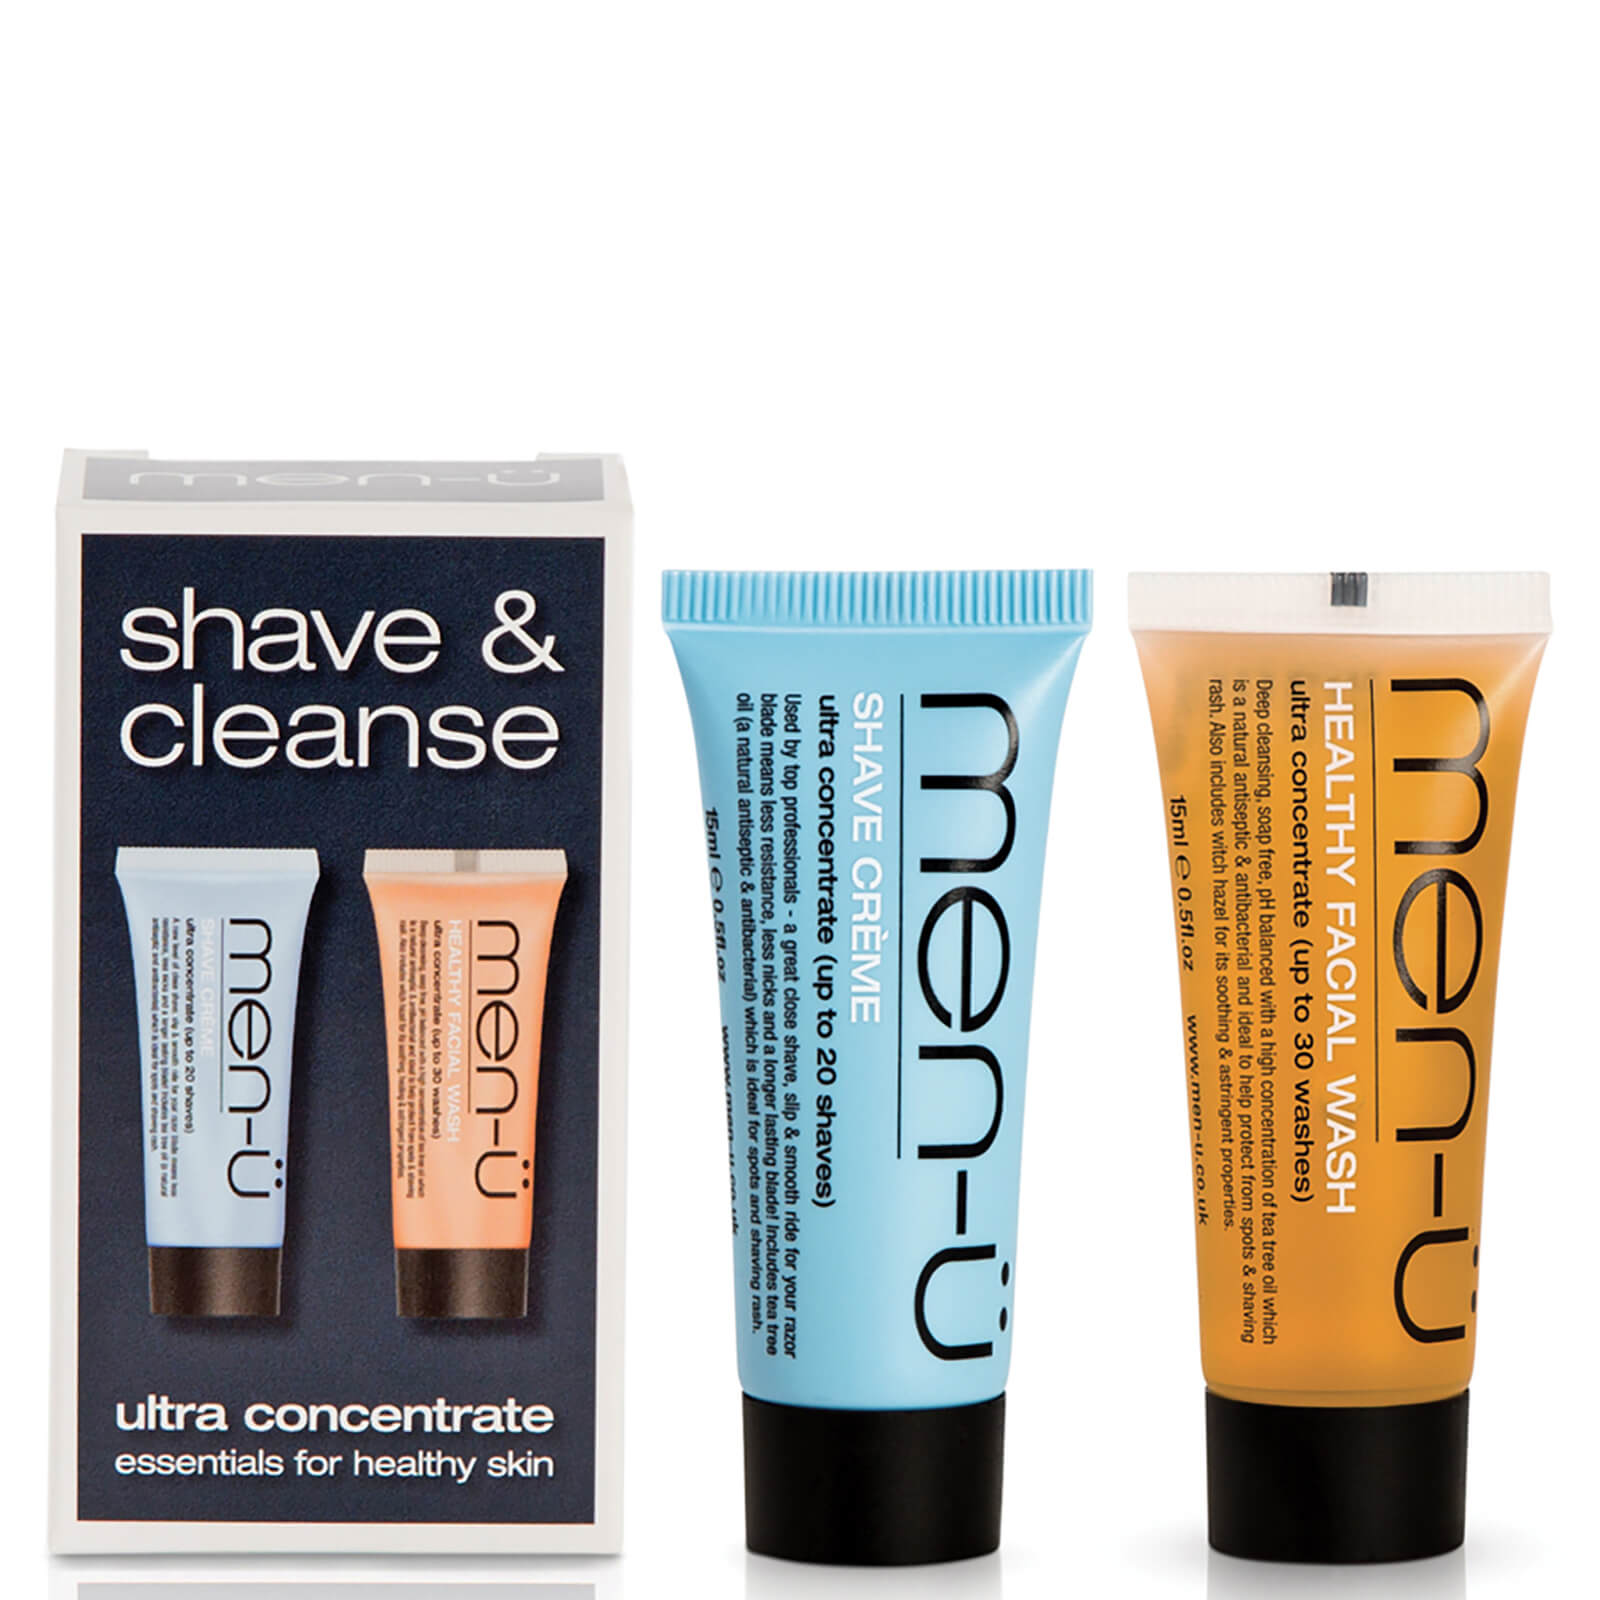 men-ü Shave and Cleanse Duo 2 x 15ml